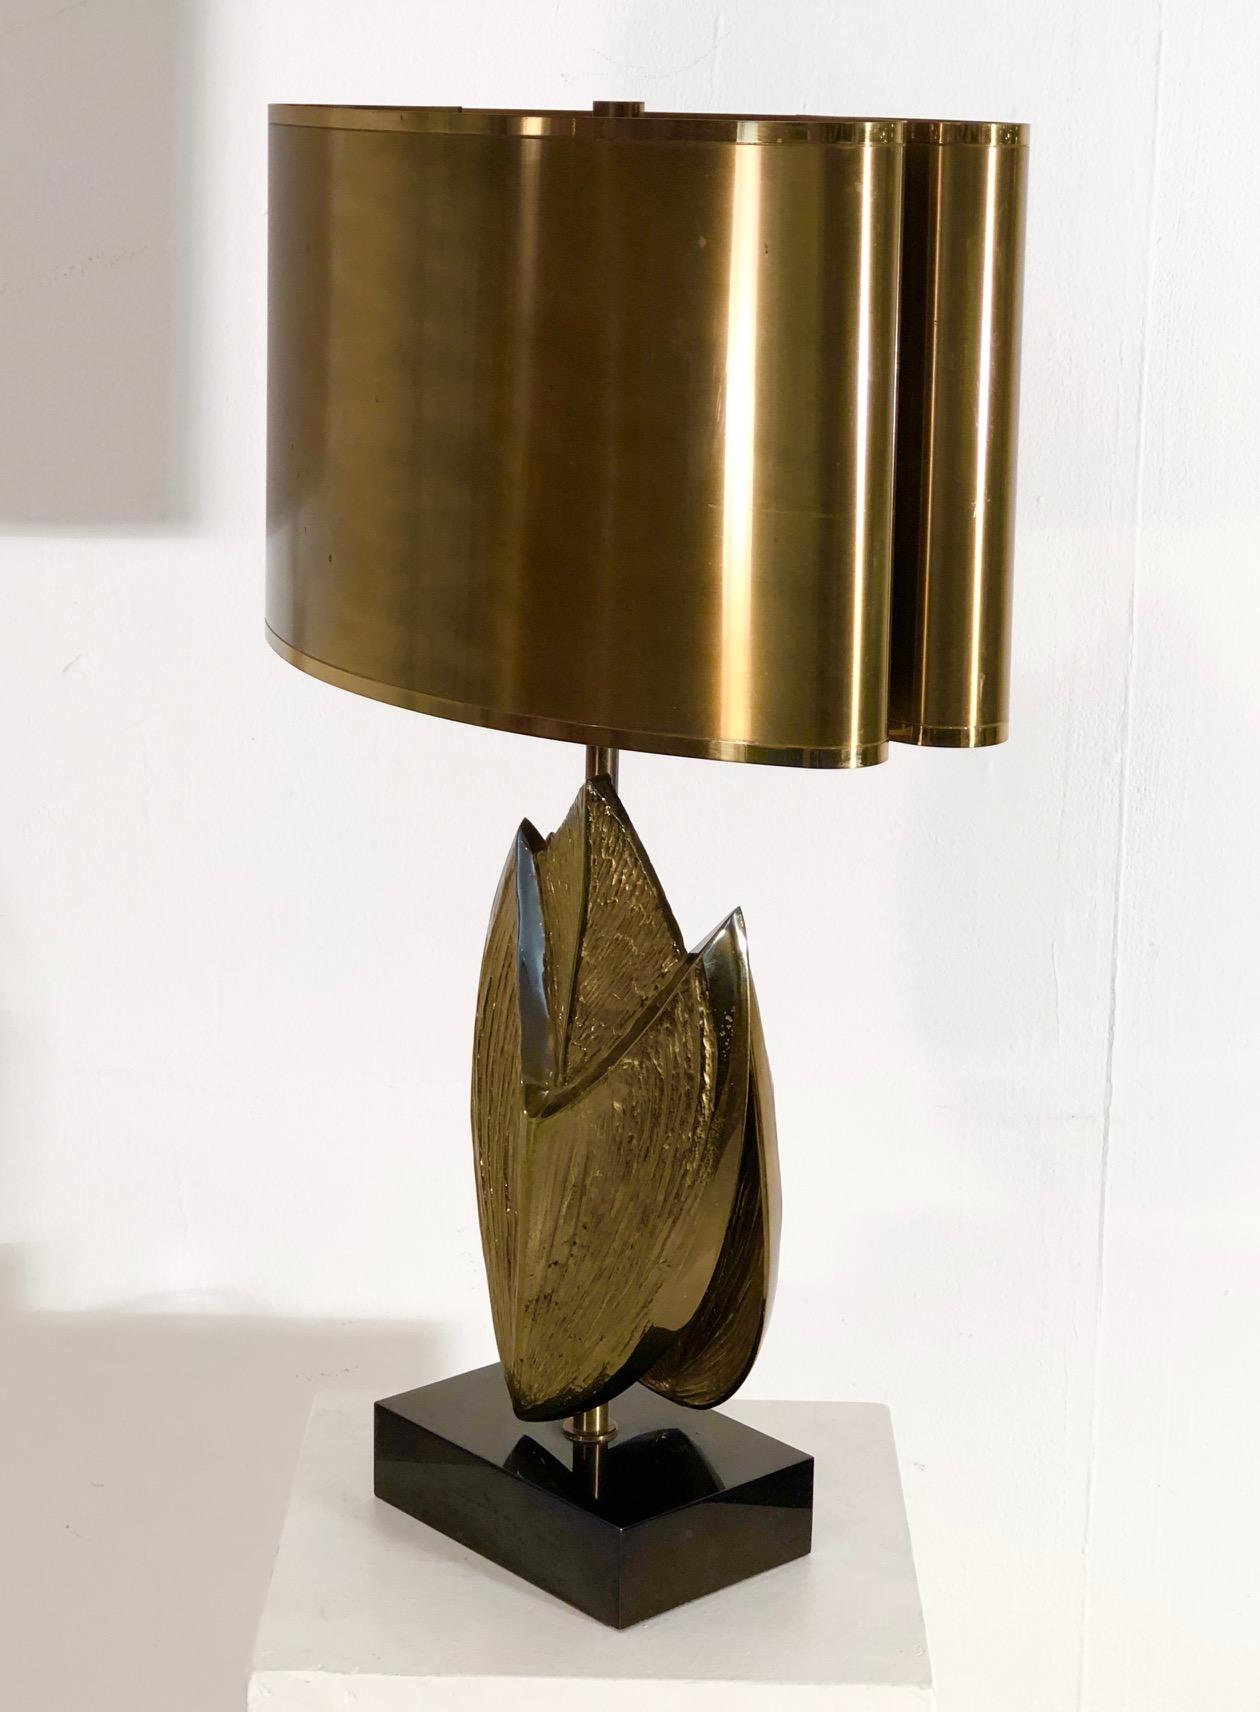 Table lamp by Maison Charles, original conditions, one of side of the shade is dirty (see picture) stamped on the base.